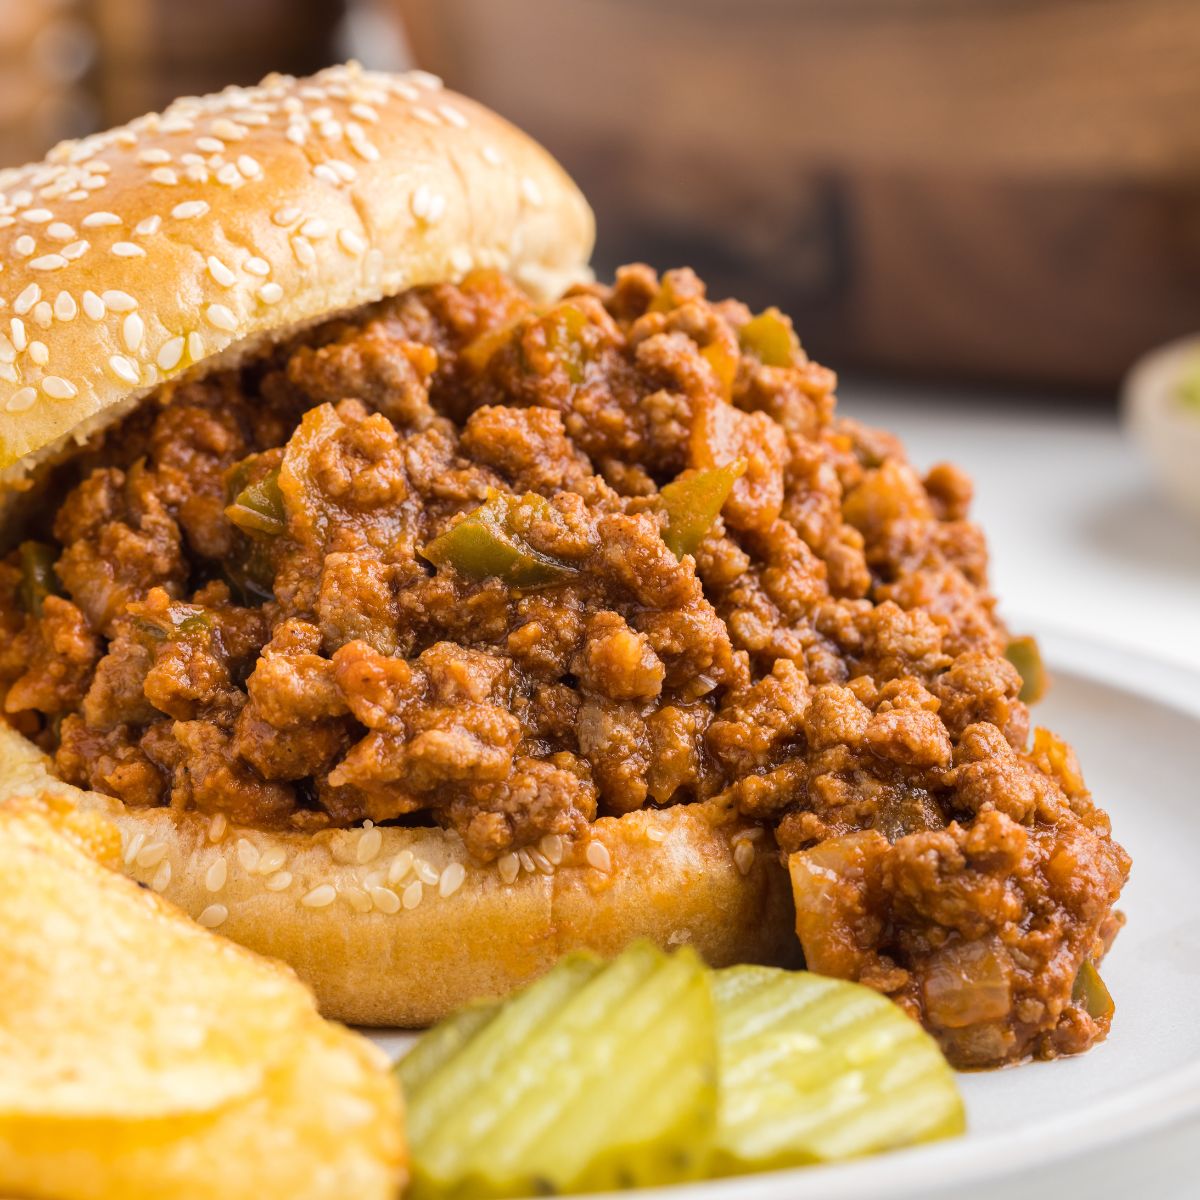 A sloppy Joe sandwich with chips and pickles next to it.